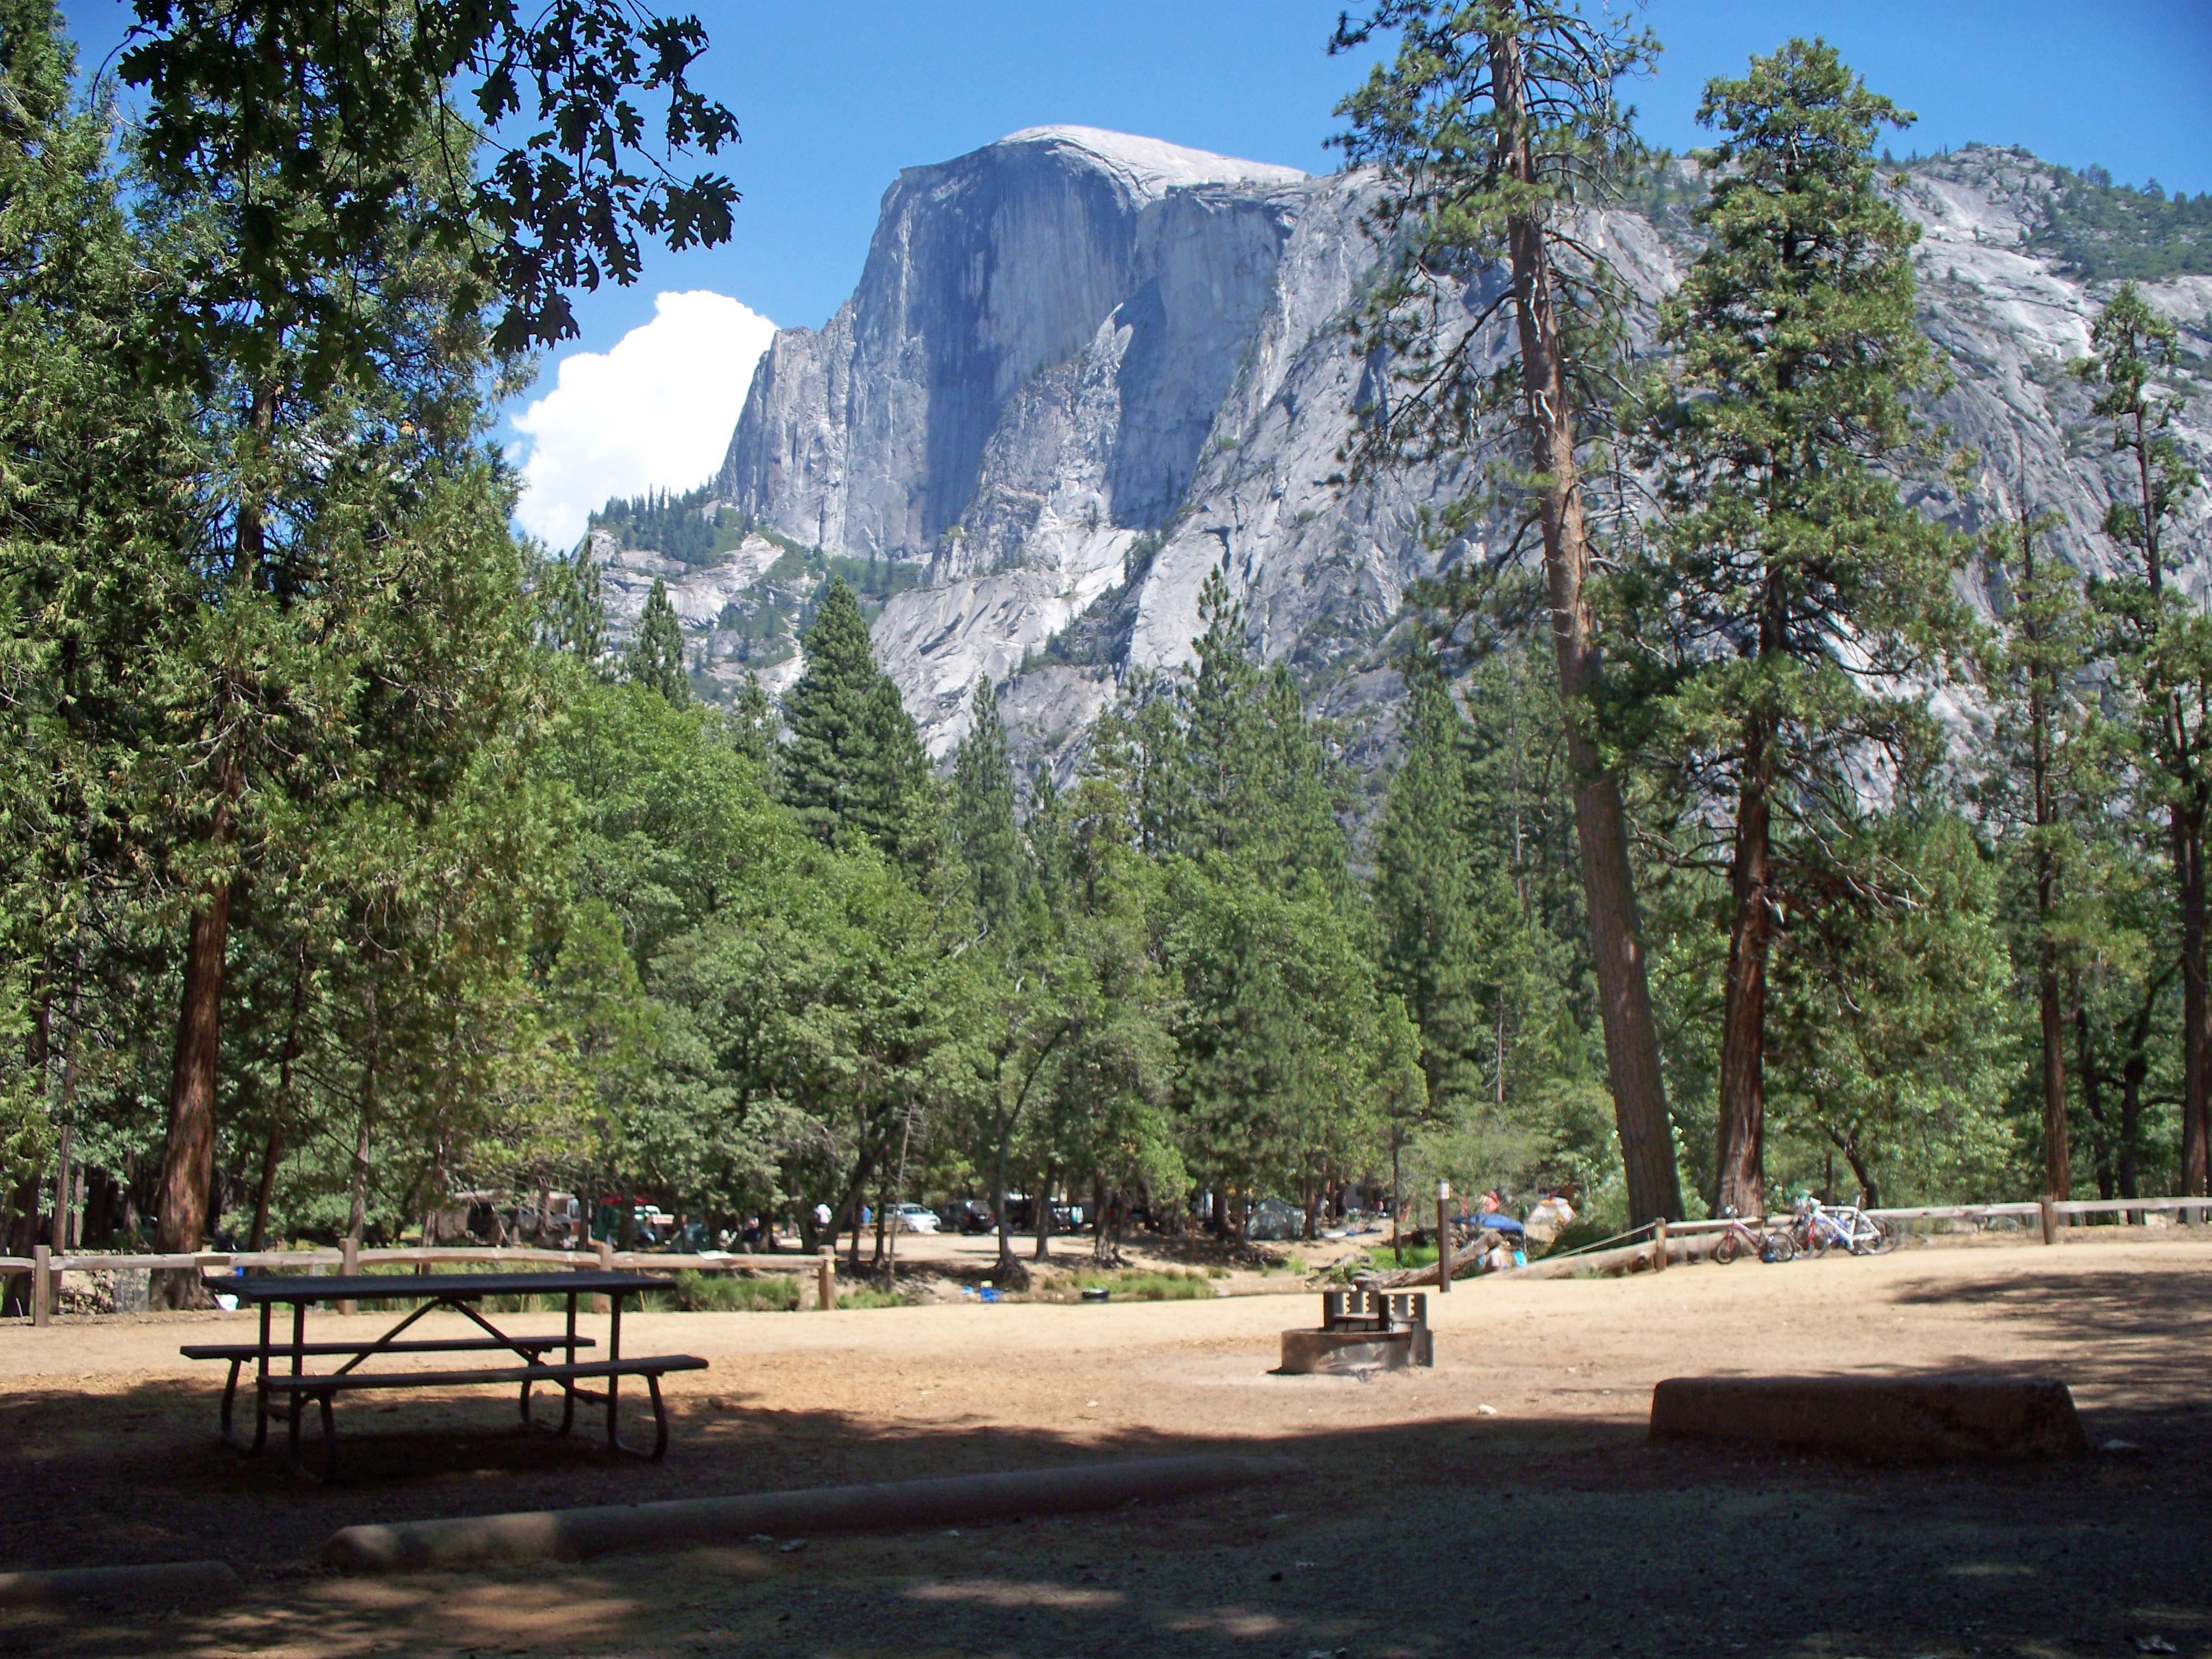 A cleared campsite shows a picnic table and fire pit. A view of Half Dome can be seen through trees.